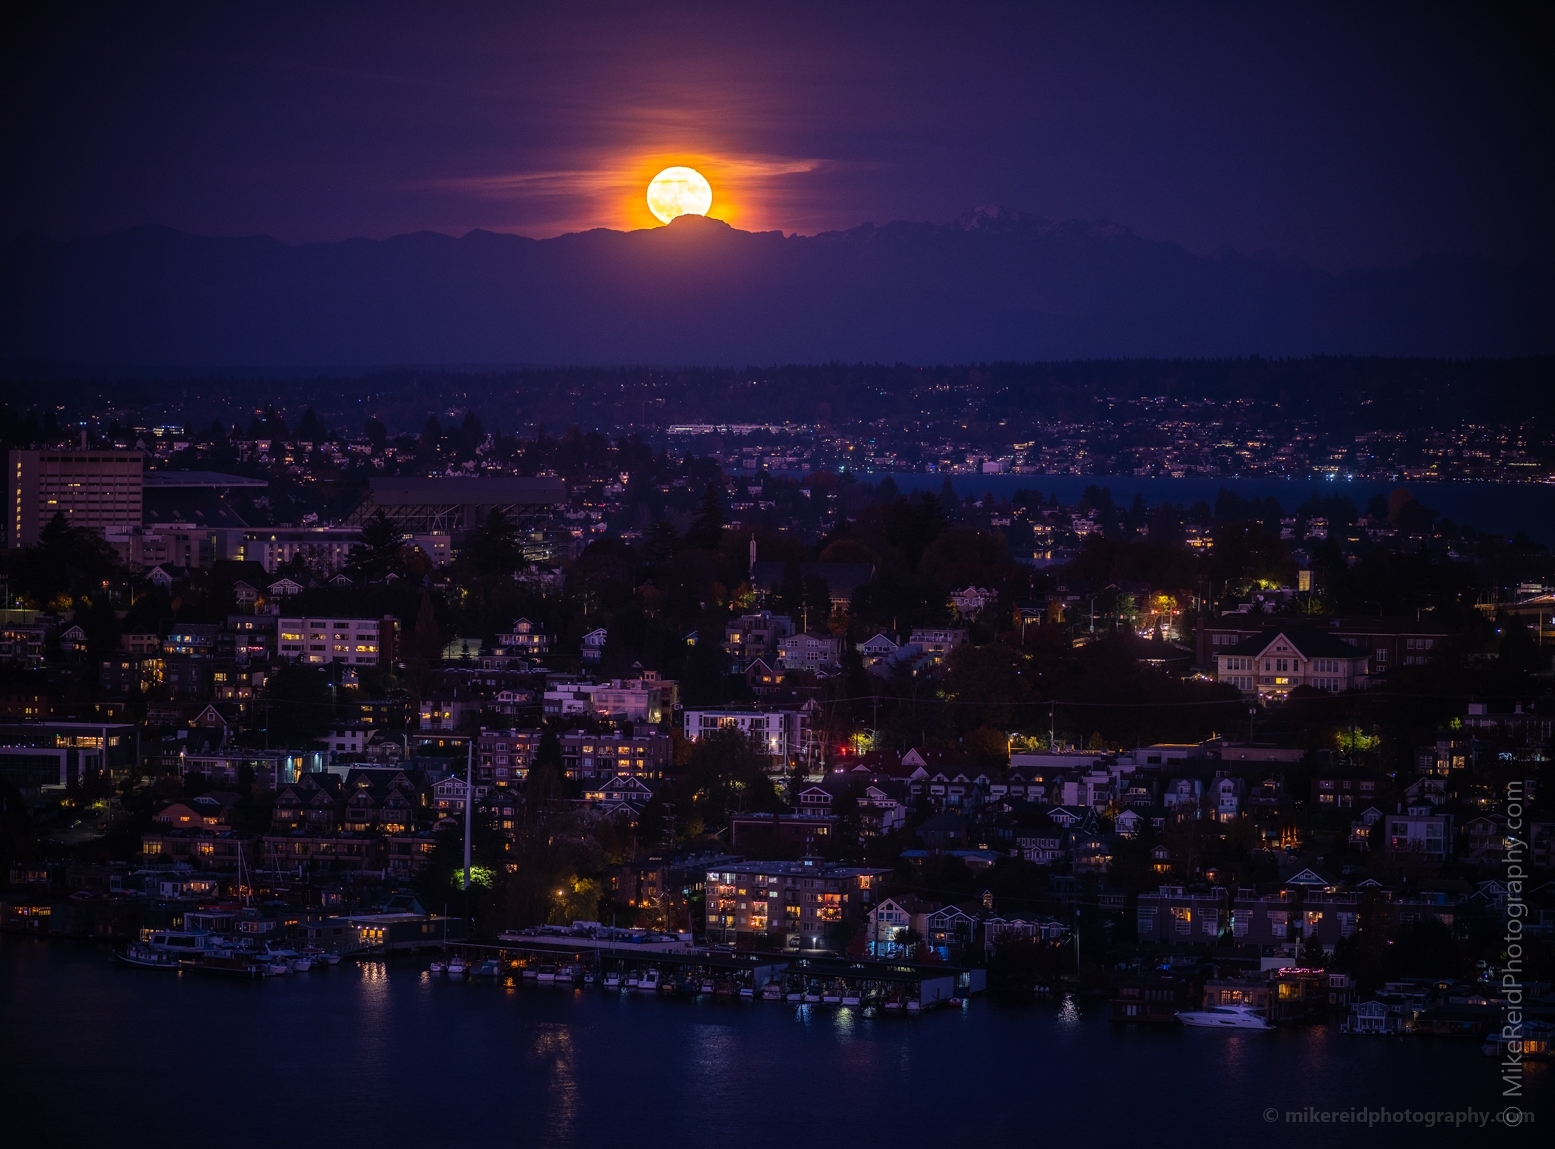 Seattle Kerry Park Photography Night Clouds Moonrise.jpg 